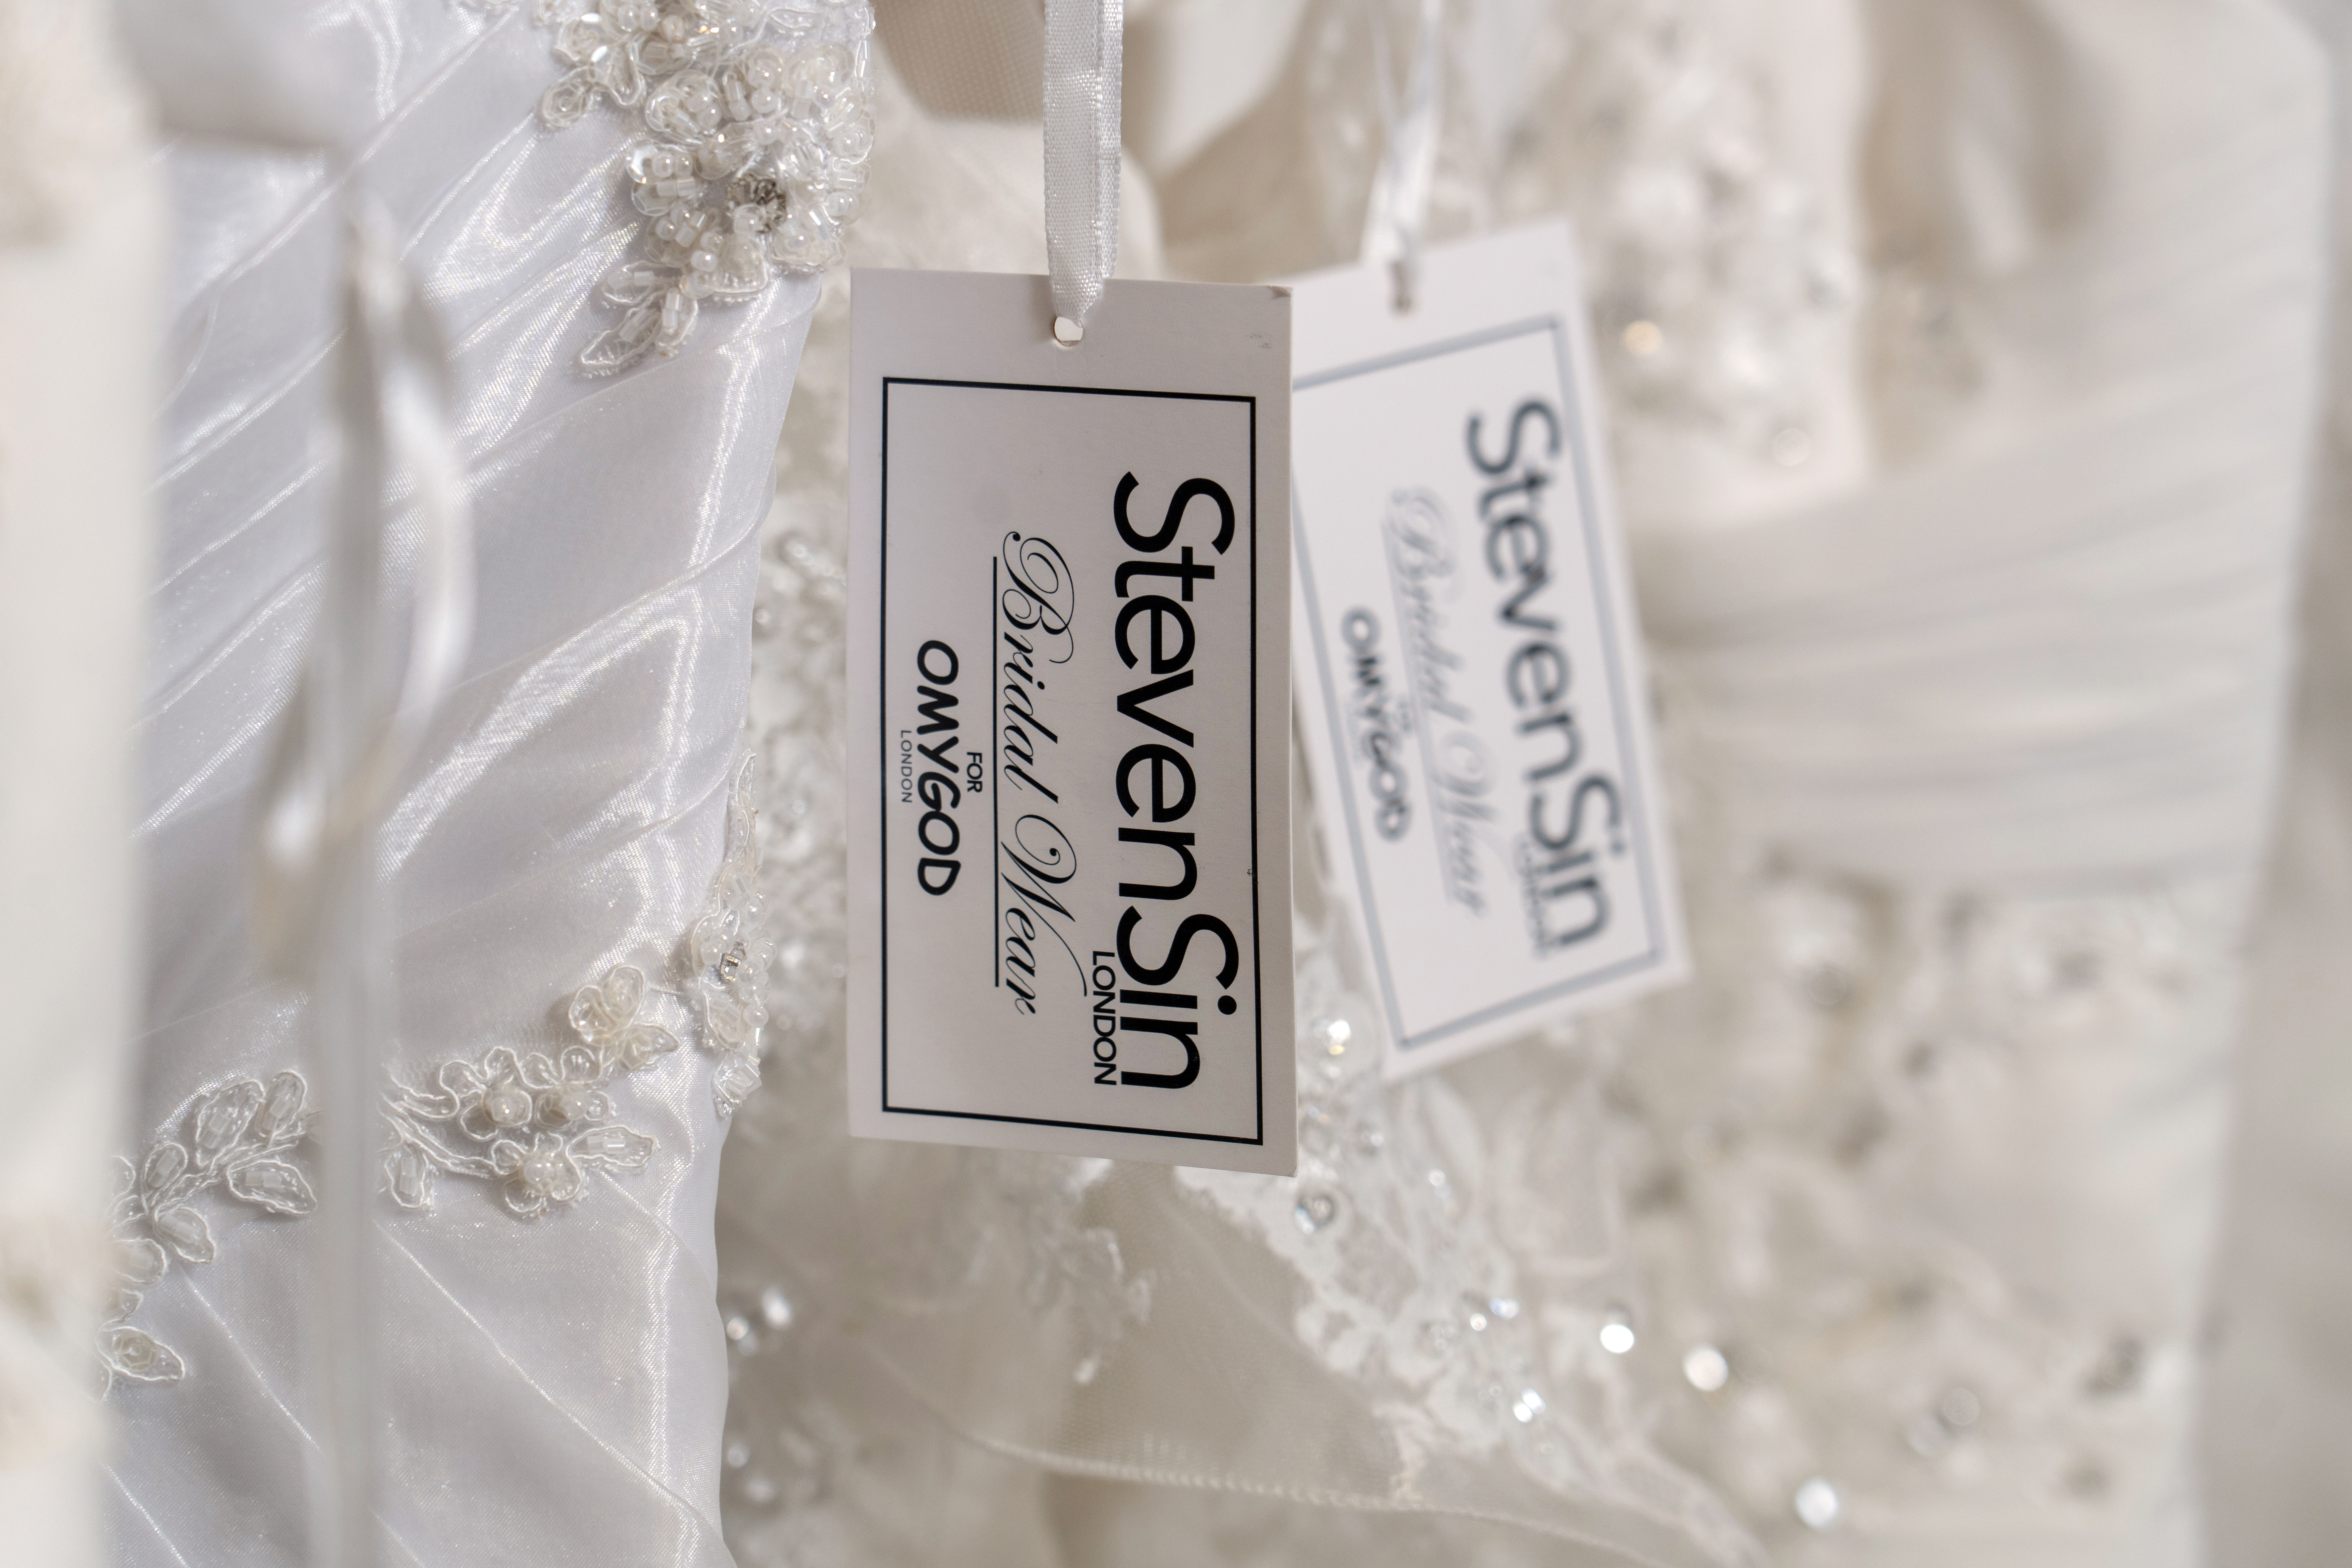 A photo zoomed in on a tag on the wedding dresses reading 'Steven Sin' 